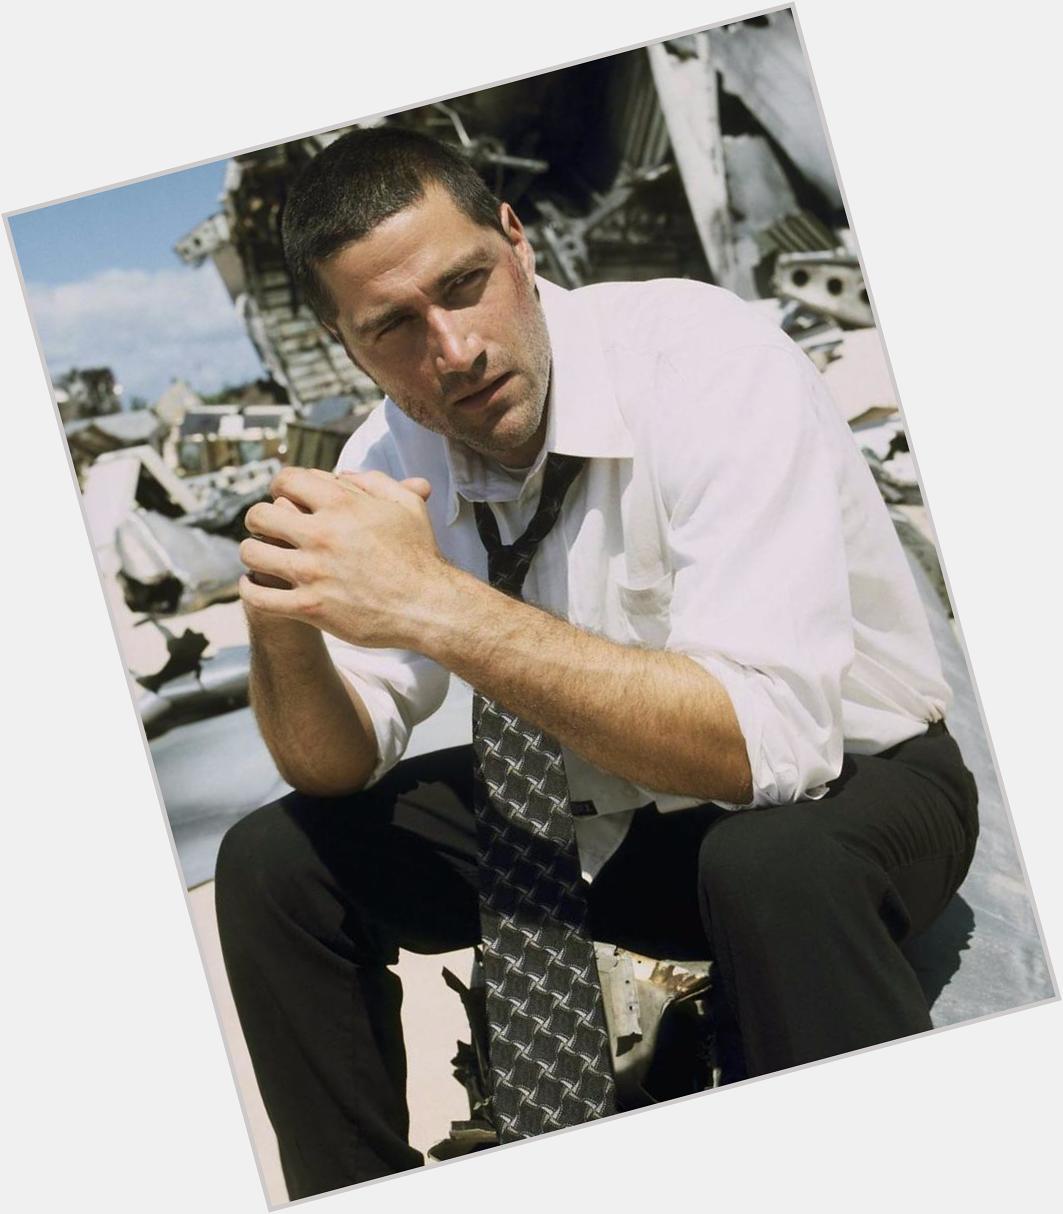 Very Happy Birthday Matthew Fox!:)I miss Lost so much. But I wish all the best for this amazing man and great actor! 